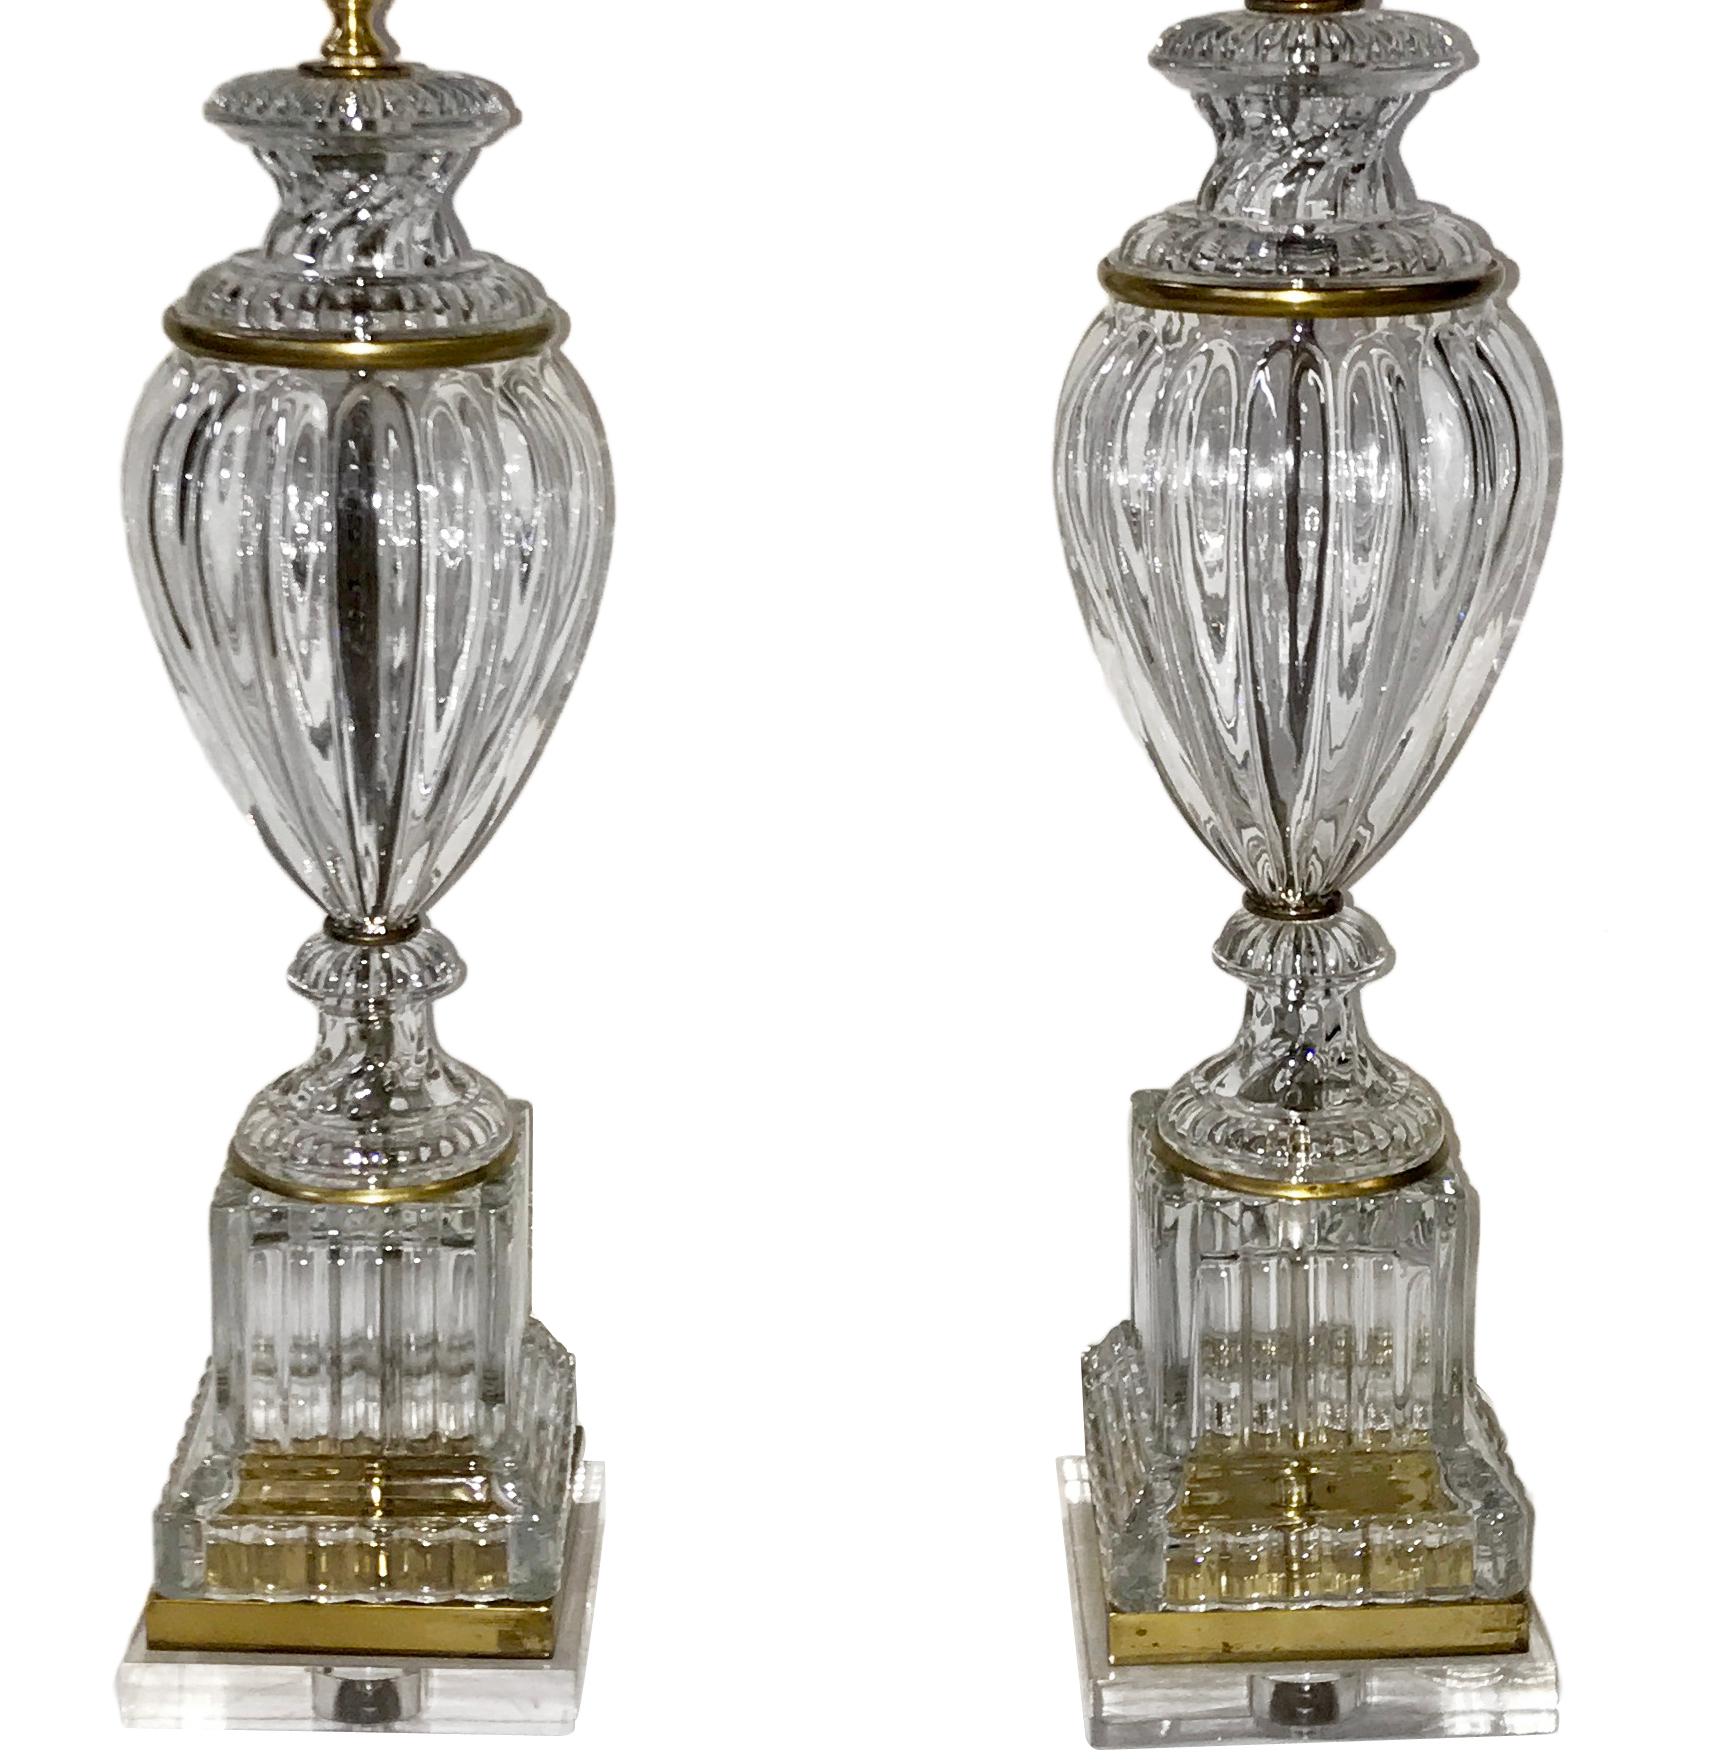 Set of 1940s French molded glass table lamps with gilt details, mounted on Lucite bases.
Several sets available.

Priced individually.

Measures: 23 height of body alone.